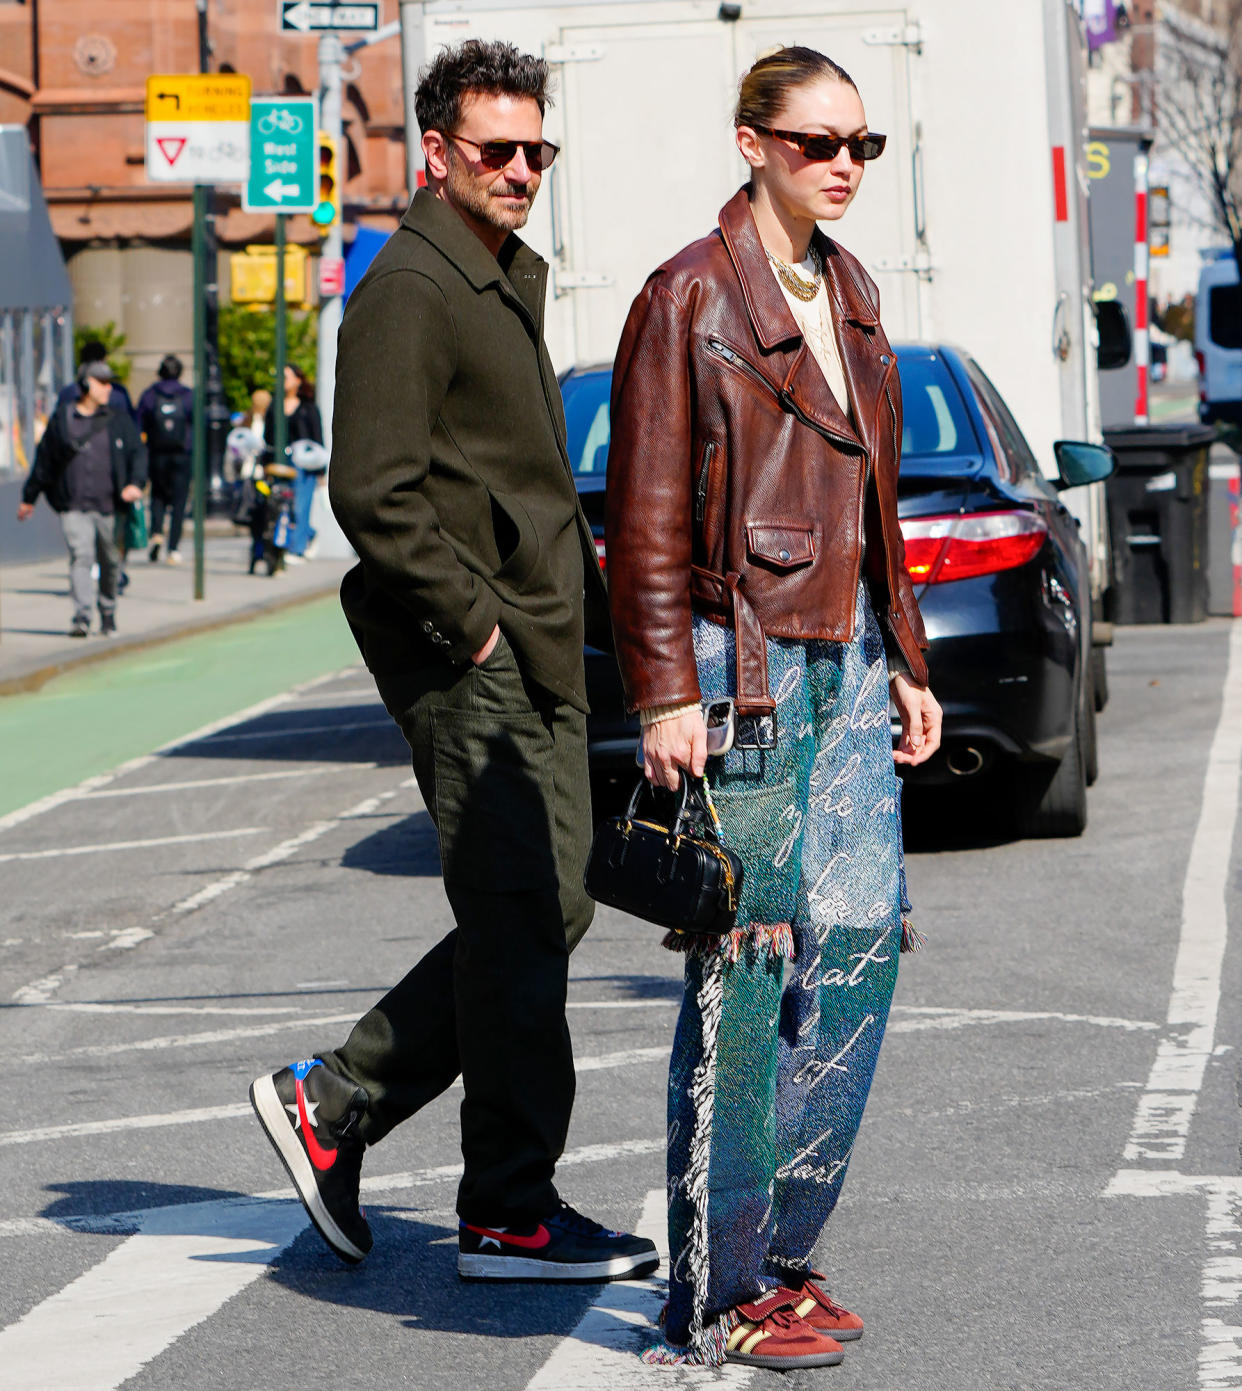 Feature Bradley Cooper and Gigi Hadid Are All Smiles While Out and About in New York City